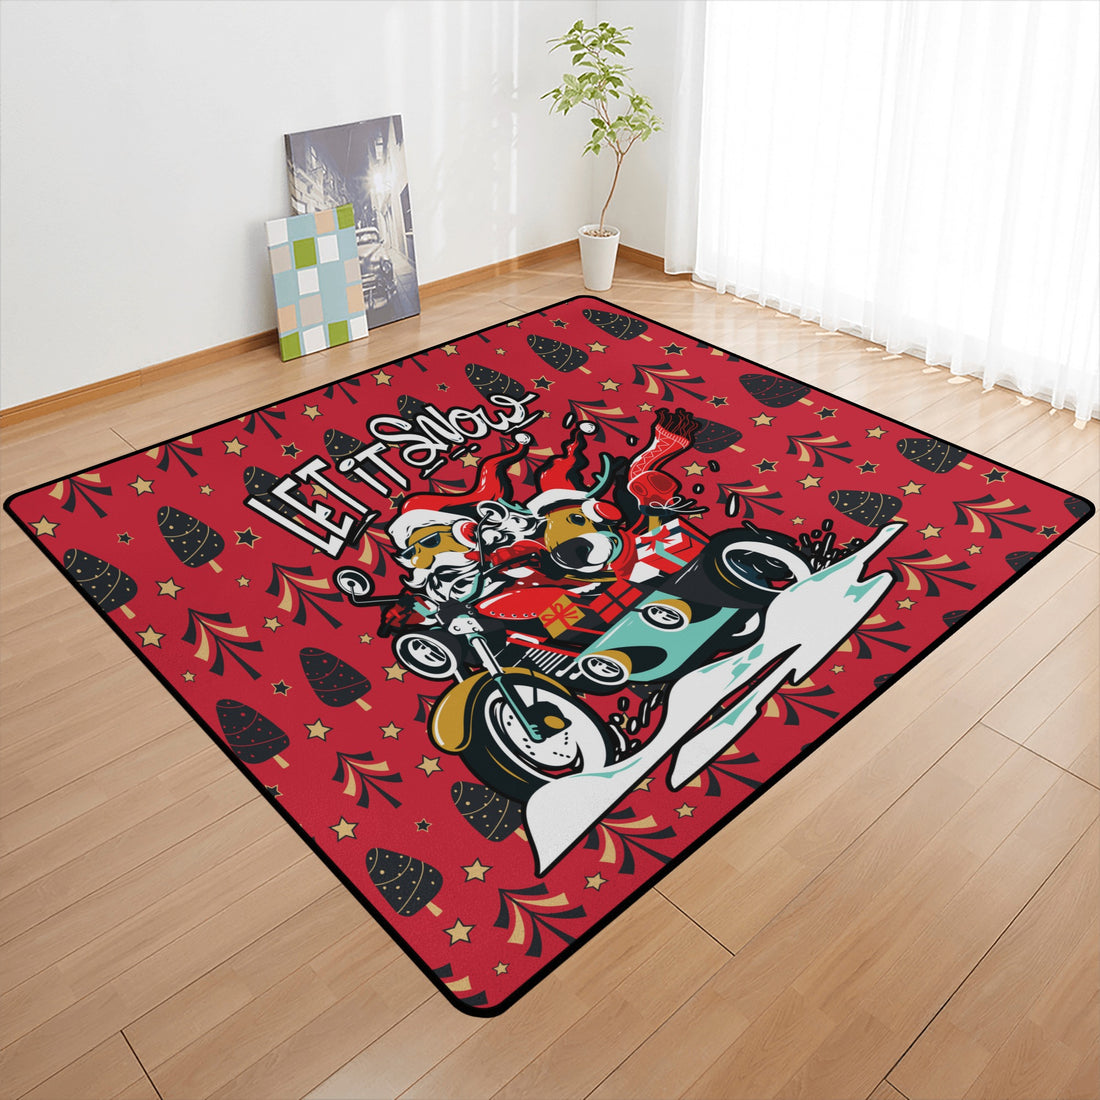 Get Cozy with a Santa Claus Christmas Area Bedroom Rug Home-clothes-jewelry